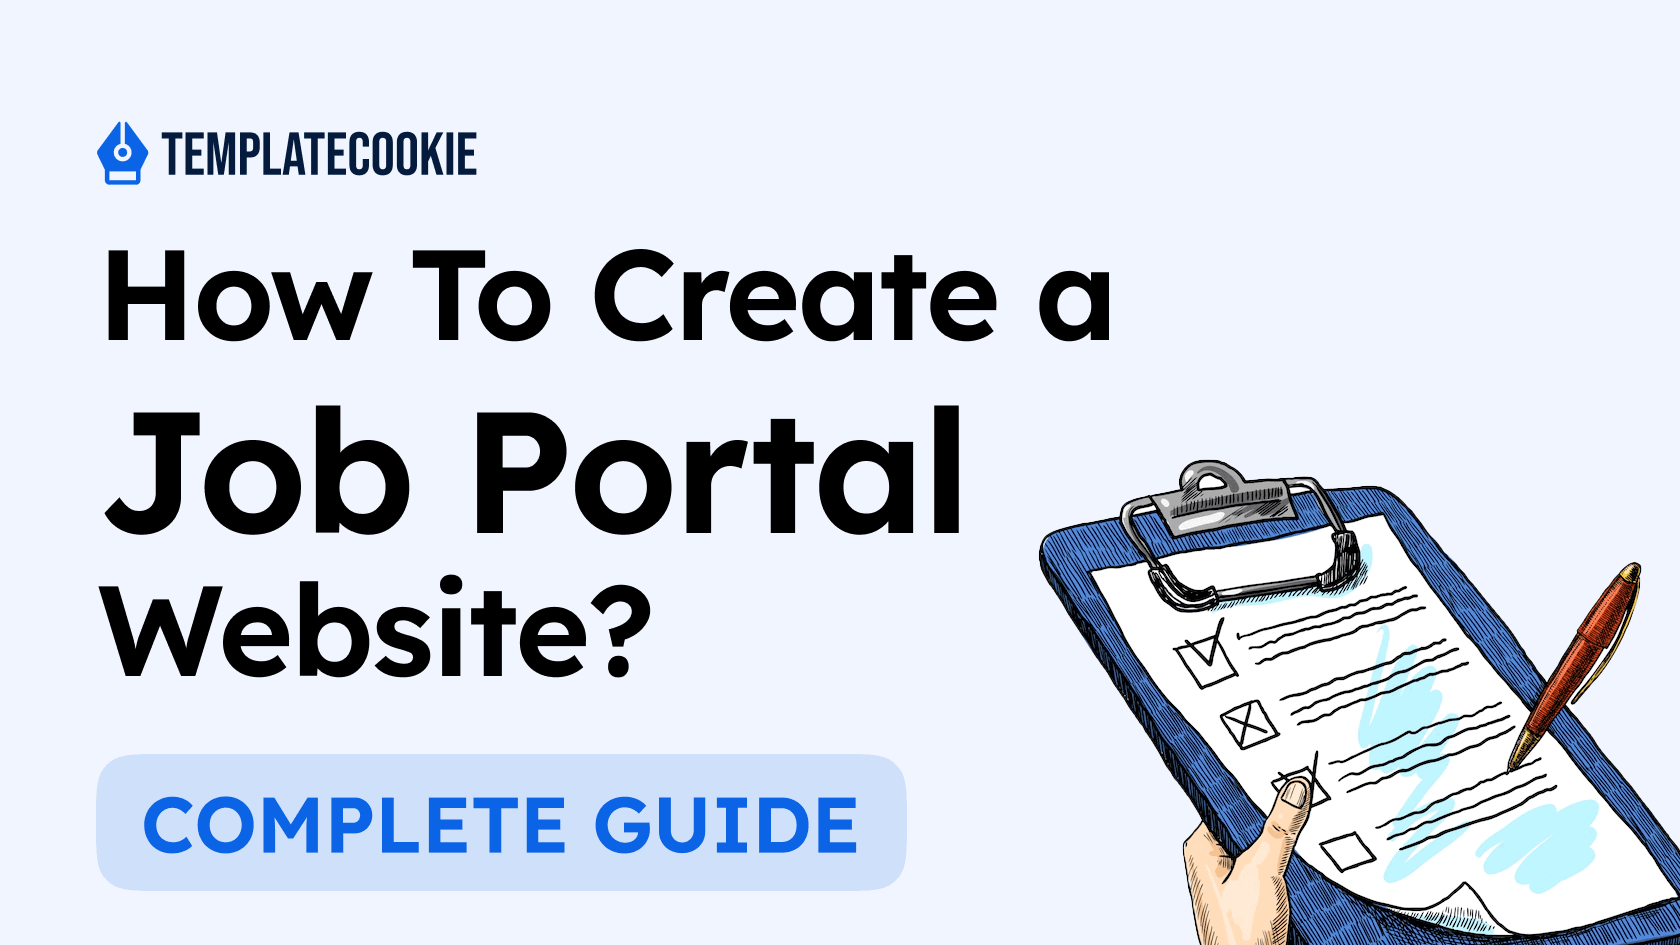 How To Create a Job Portal Website - A Step By Step Guide